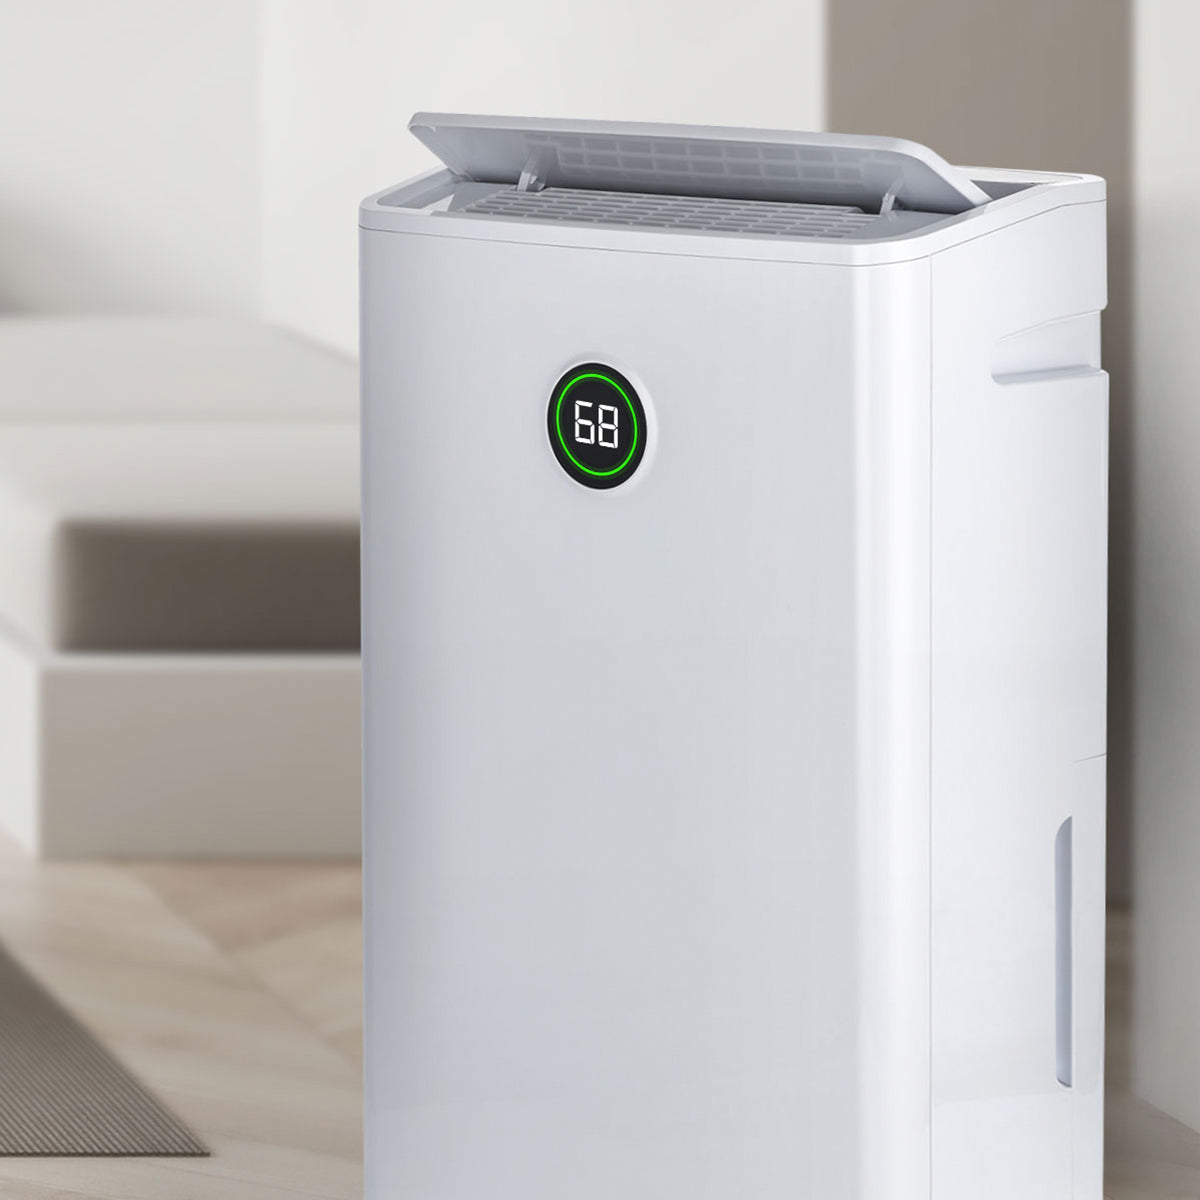 Maintain Ideal Humidity Levels with Premium Dehumidifiers - UK